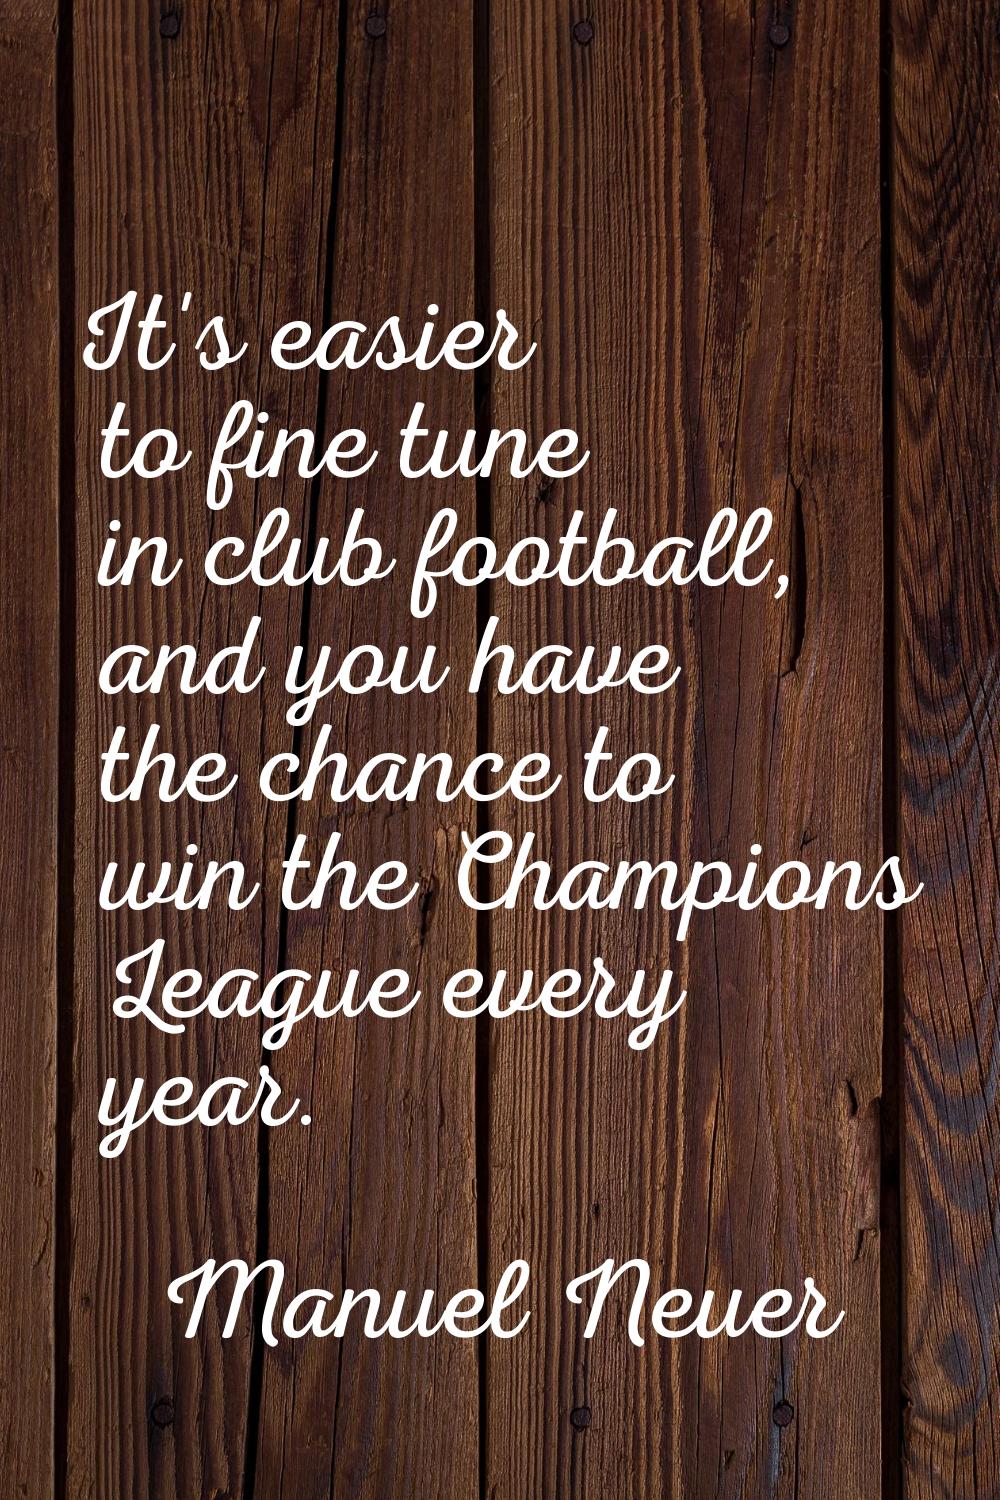 It's easier to fine tune in club football, and you have the chance to win the Champions League ever